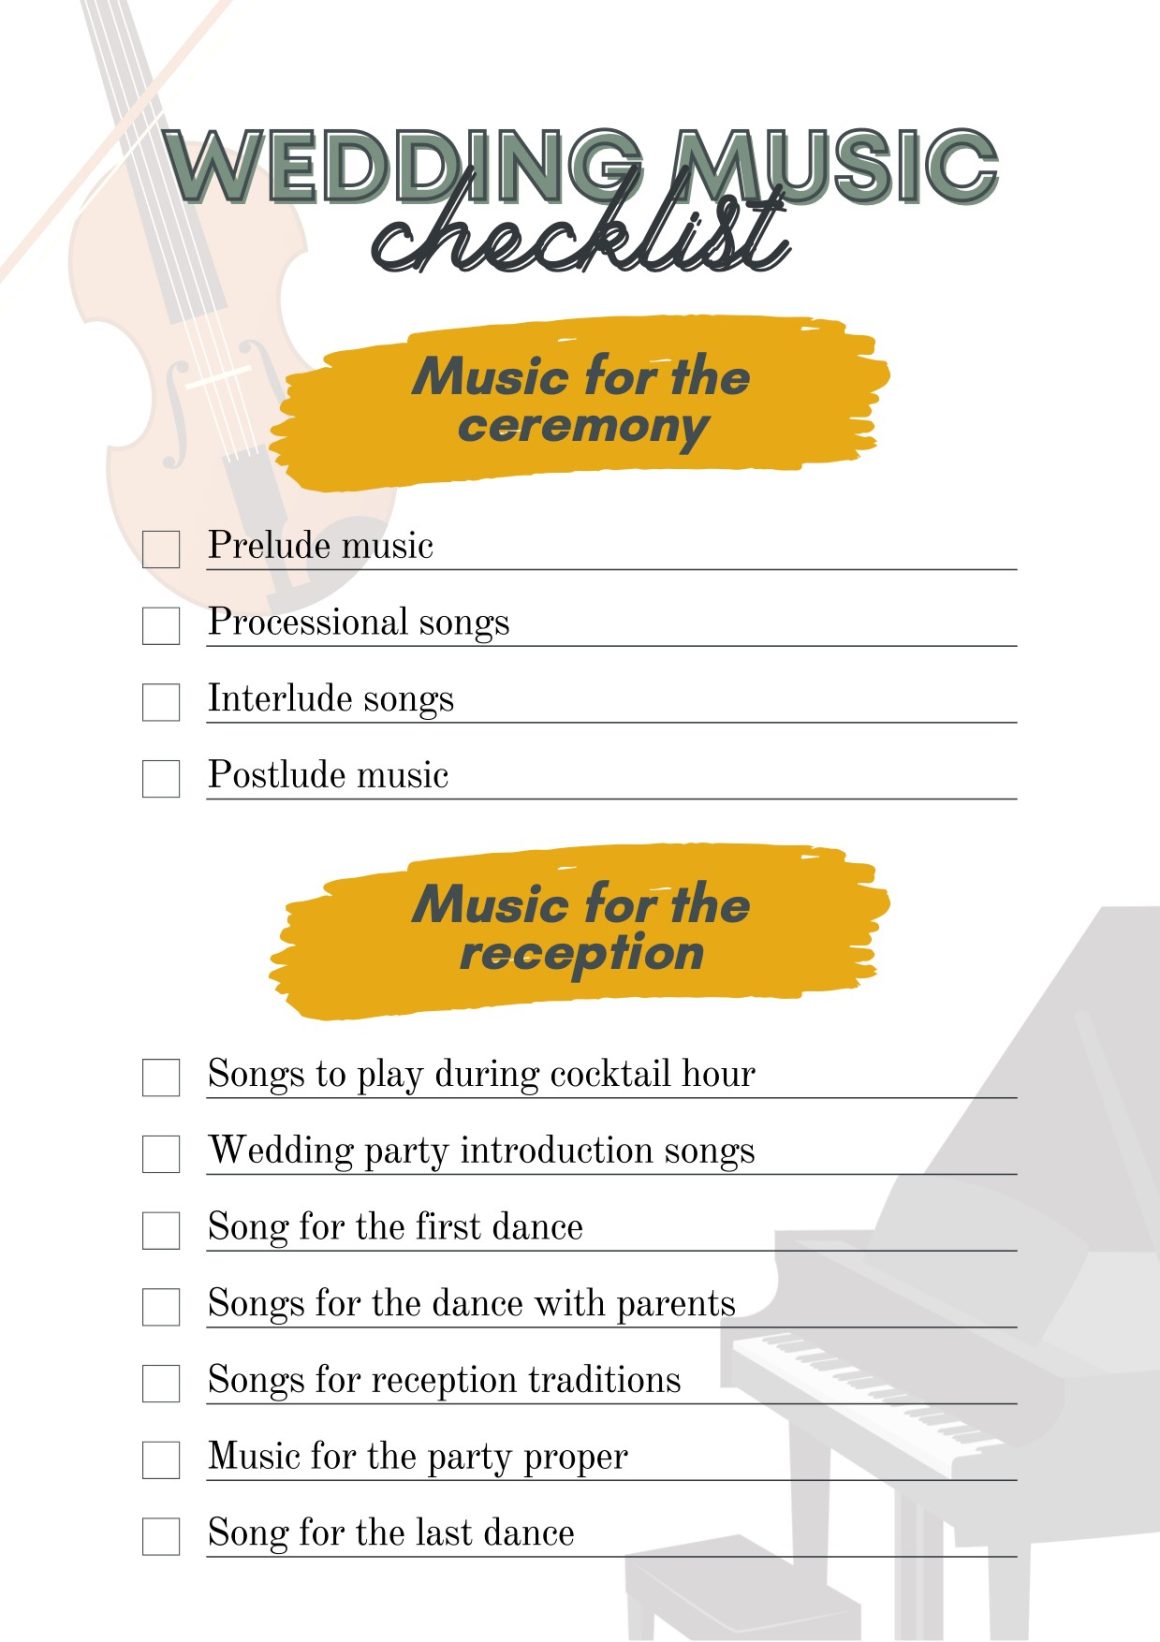 wedding-song-checklist-guide-12-things-to-include